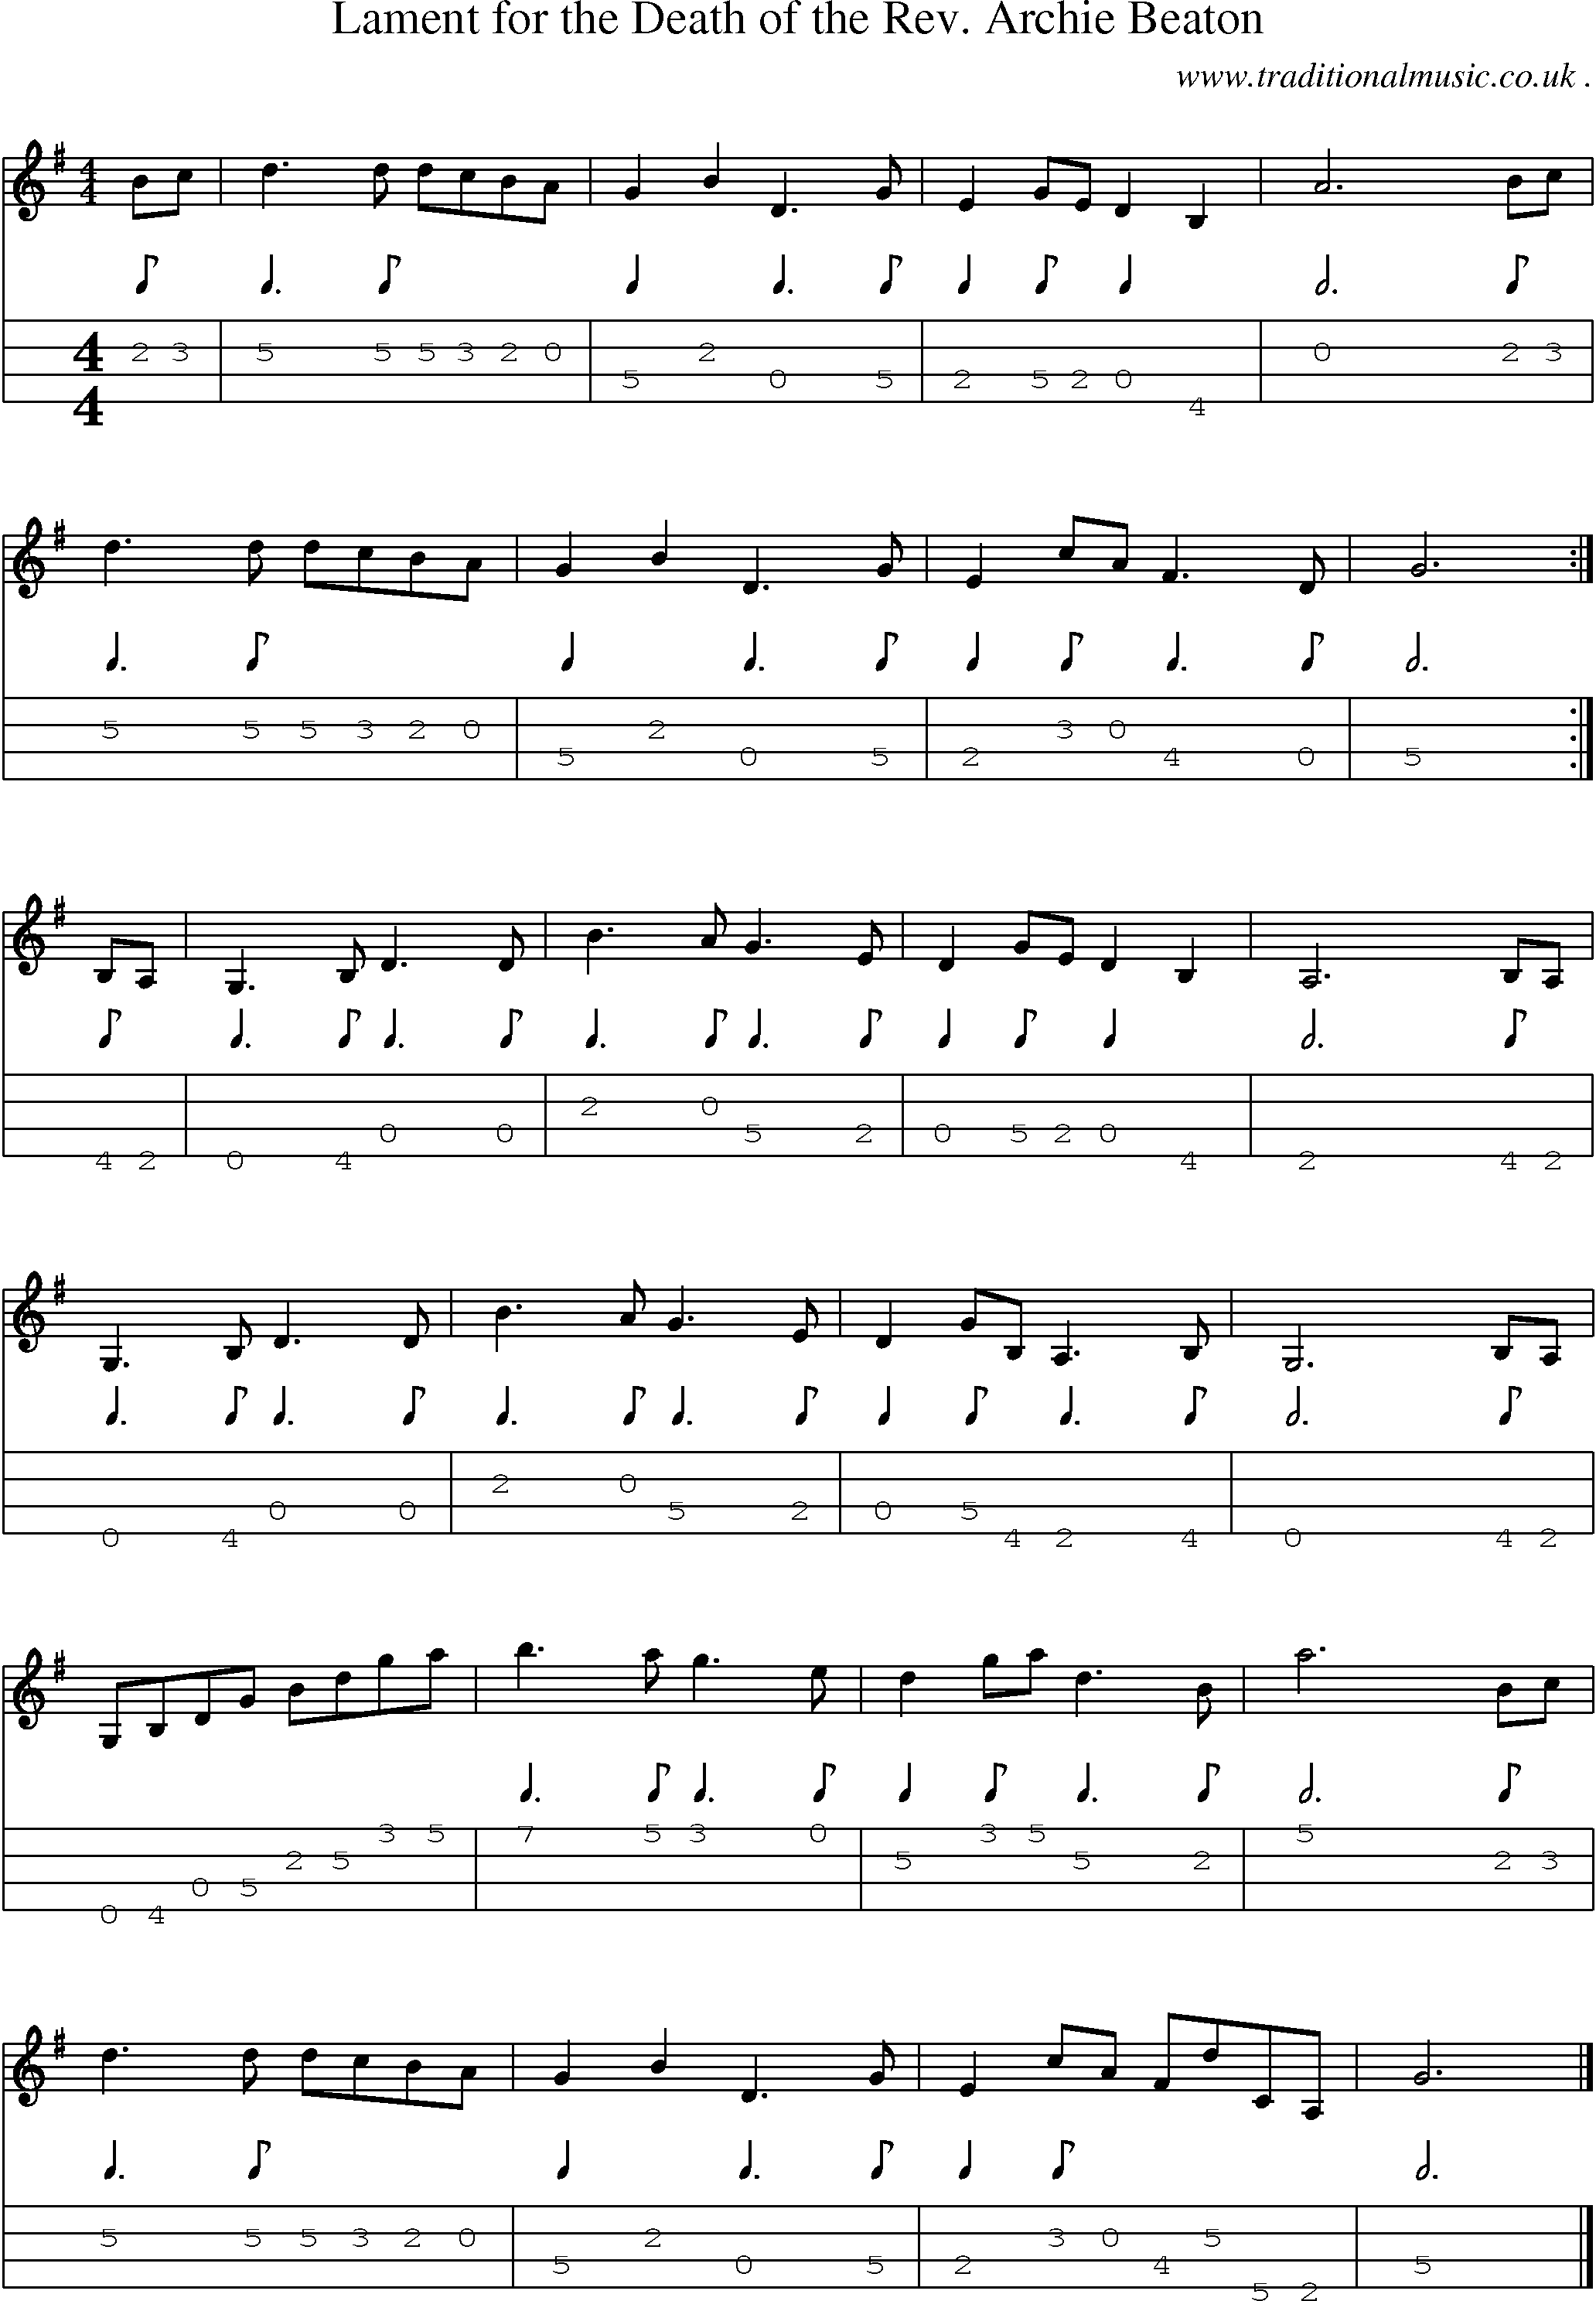 Sheet-music  score, Chords and Mandolin Tabs for Lament For The Death Of The Rev Archie Beaton